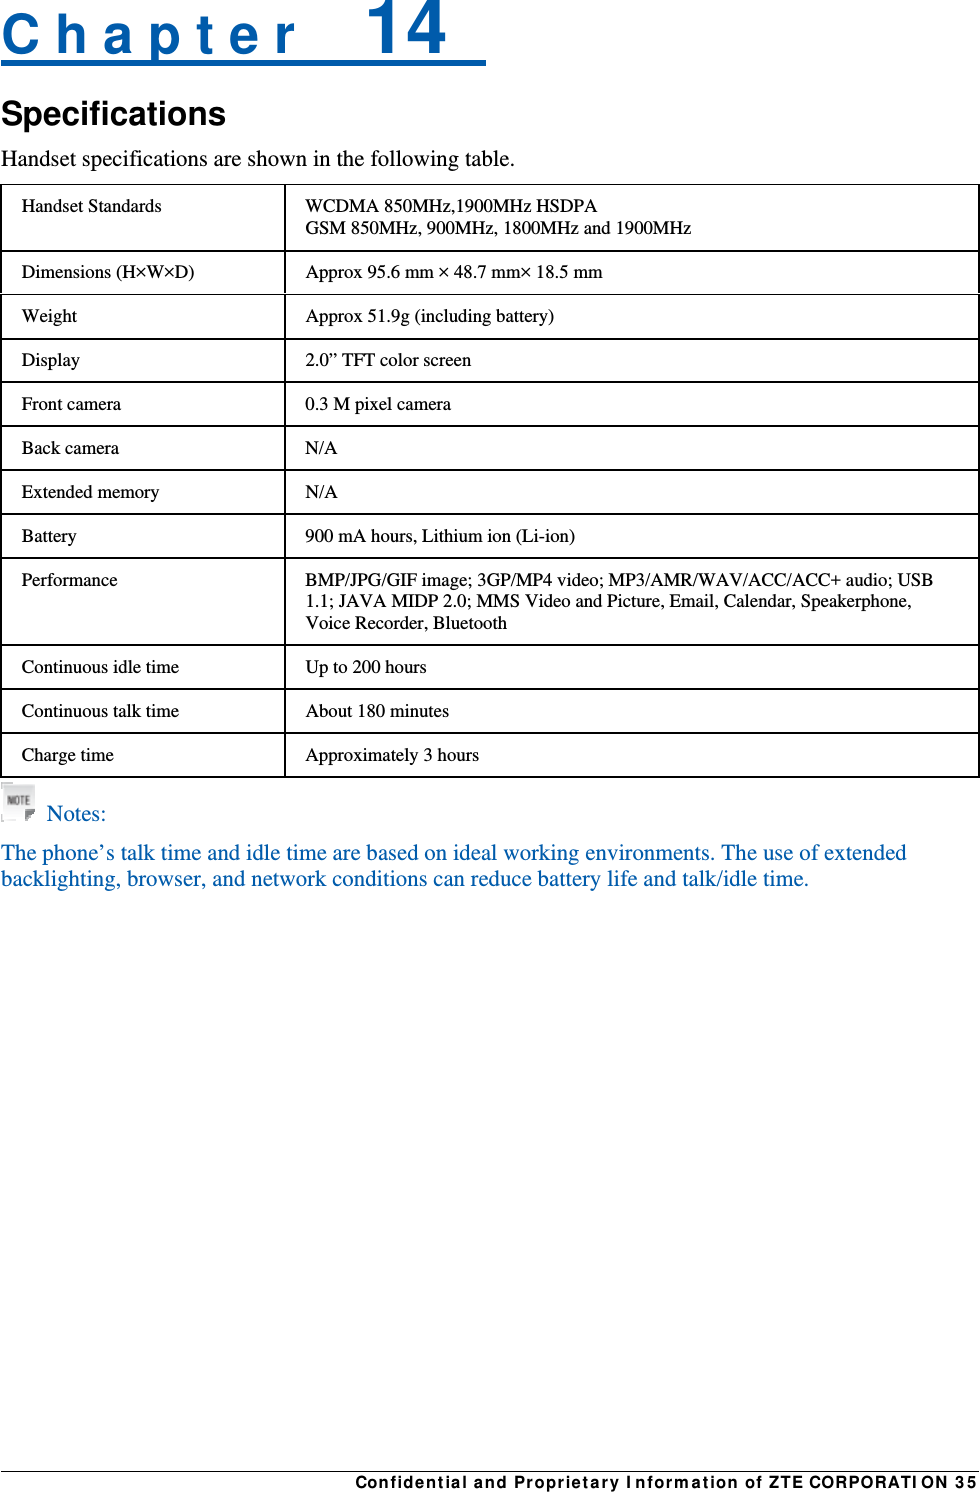 Confidential and Proprietary Information of ZTE CORPORATION 35C h a p t e r    14   Specifications Handset specifications are shown in the following table. Handset Standards  WCDMA 850MHz,1900MHz HSDPA GSM 850MHz, 900MHz, 1800MHz and 1900MHz Dimensions (H×W×D)  Approx 95.6 mm × 48.7 mm× 18.5 mm Weight  Approx 51.9g (including battery) Display  2.0” TFT color screen Front camera  0.3 M pixel camera Back camera  N/A Extended memory  N/A Battery  900 mA hours, Lithium ion (Li-ion) Performance  BMP/JPG/GIF image; 3GP/MP4 video; MP3/AMR/WAV/ACC/ACC+ audio; USB 1.1; JAVA MIDP 2.0; MMS Video and Picture, Email, Calendar, Speakerphone, Voice Recorder, Bluetooth Continuous idle time  Up to 200 hours Continuous talk time  About 180 minutes Charge time  Approximately 3 hours   Notes: The phone’s talk time and idle time are based on ideal working environments. The use of extended backlighting, browser, and network conditions can reduce battery life and talk/idle time. 